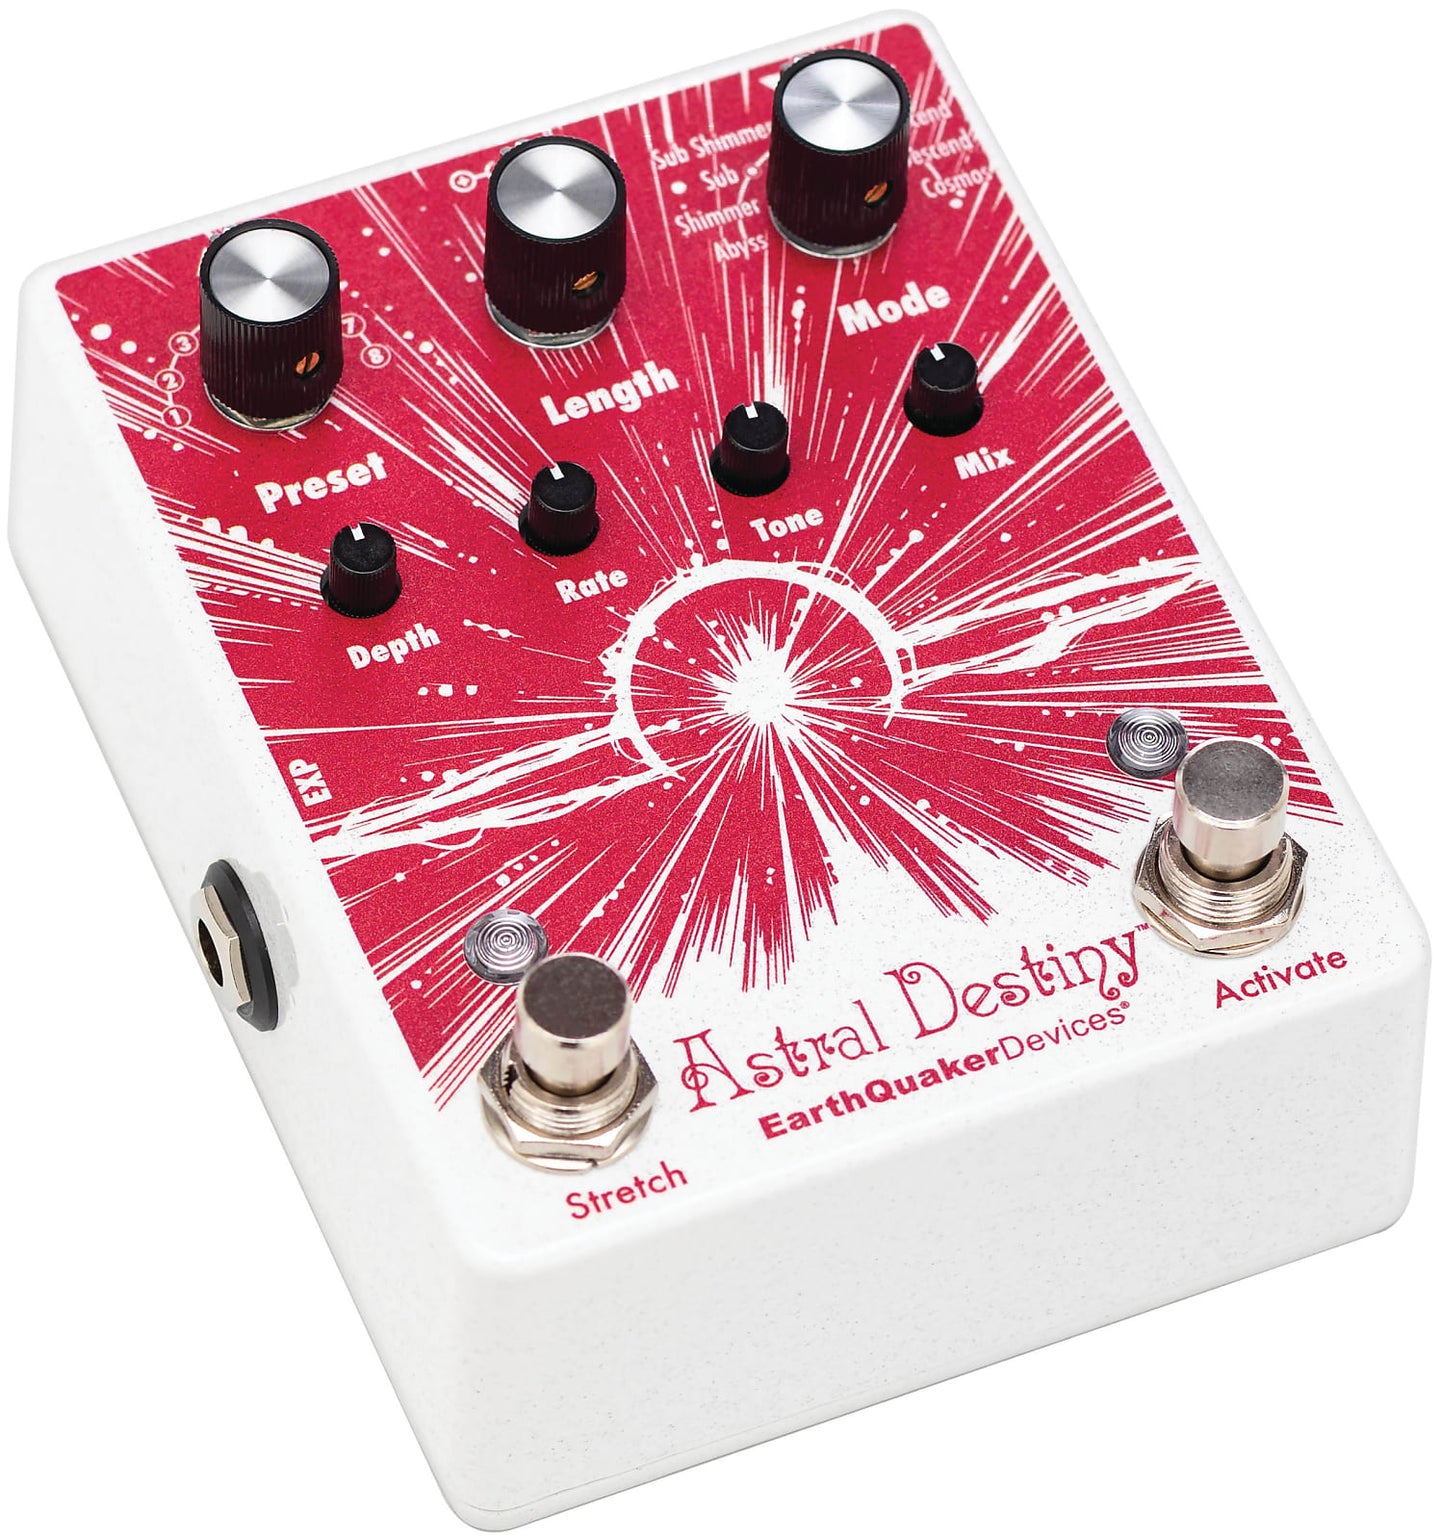 EarthQuaker Devices Astral Destiny Reverb Octave Pitch